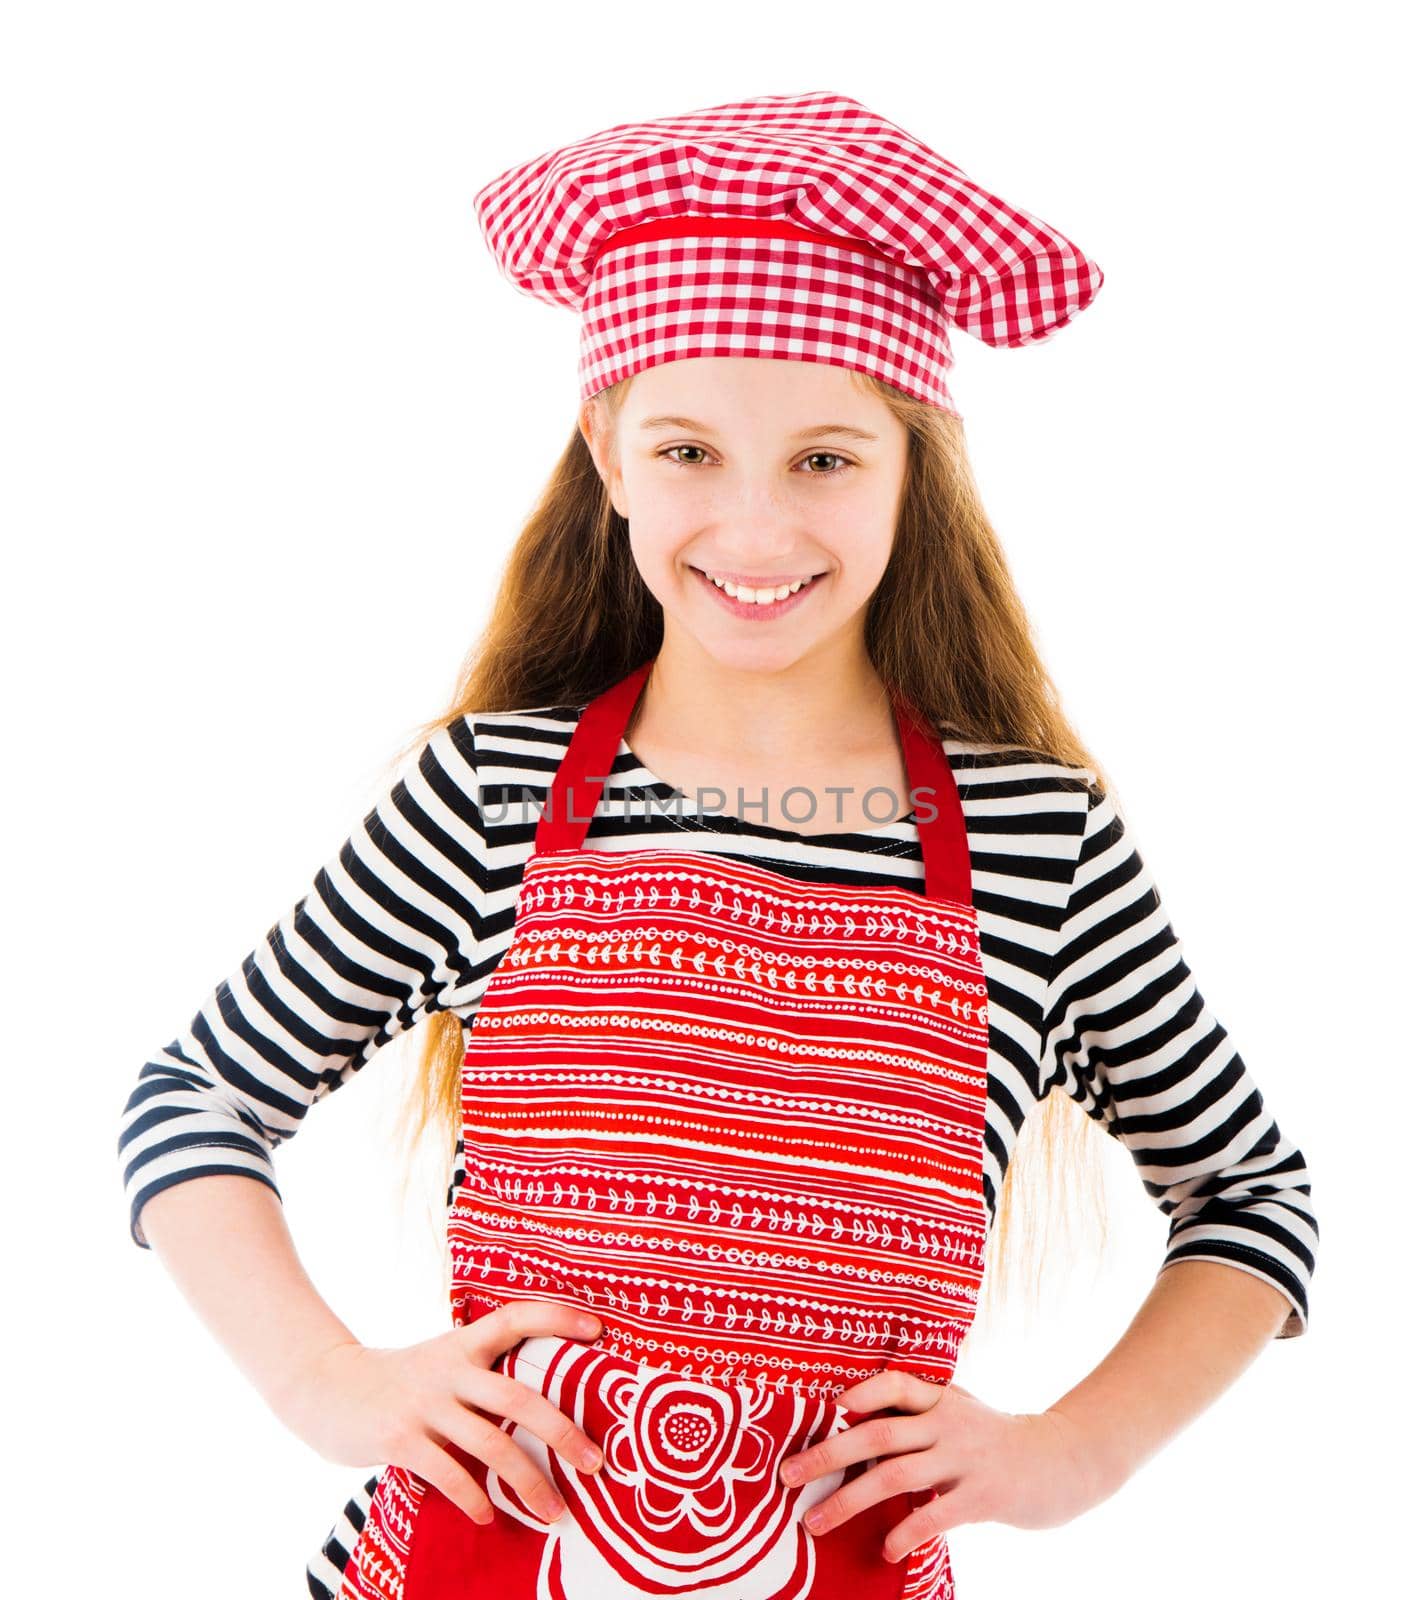 Little girl in red chef uniform smiles isolated on white background